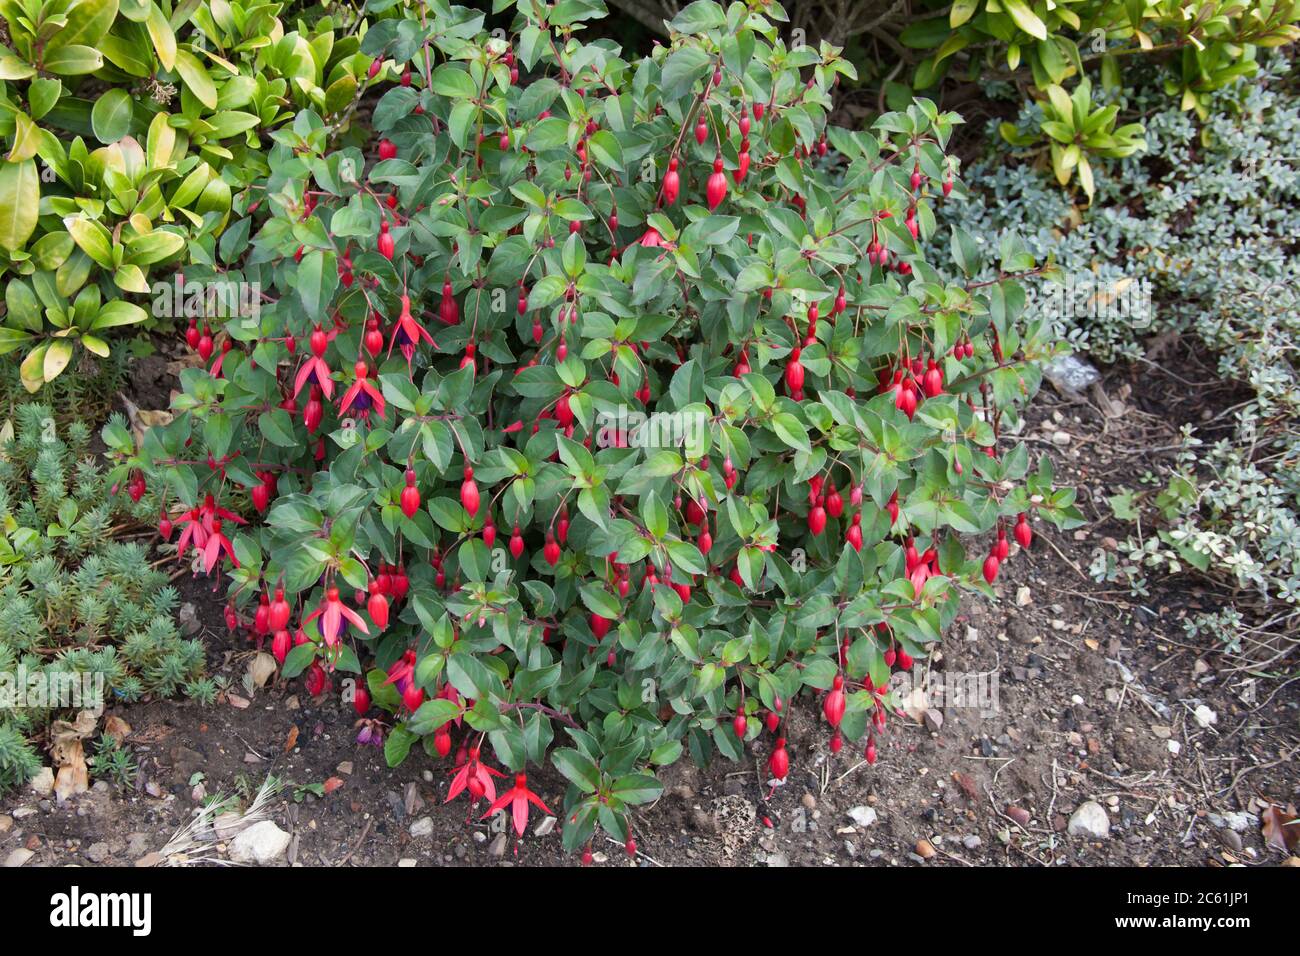 A Hardy Fuchsia which is a species of Evening Primrose also known as a Fuchsia Stock Photo